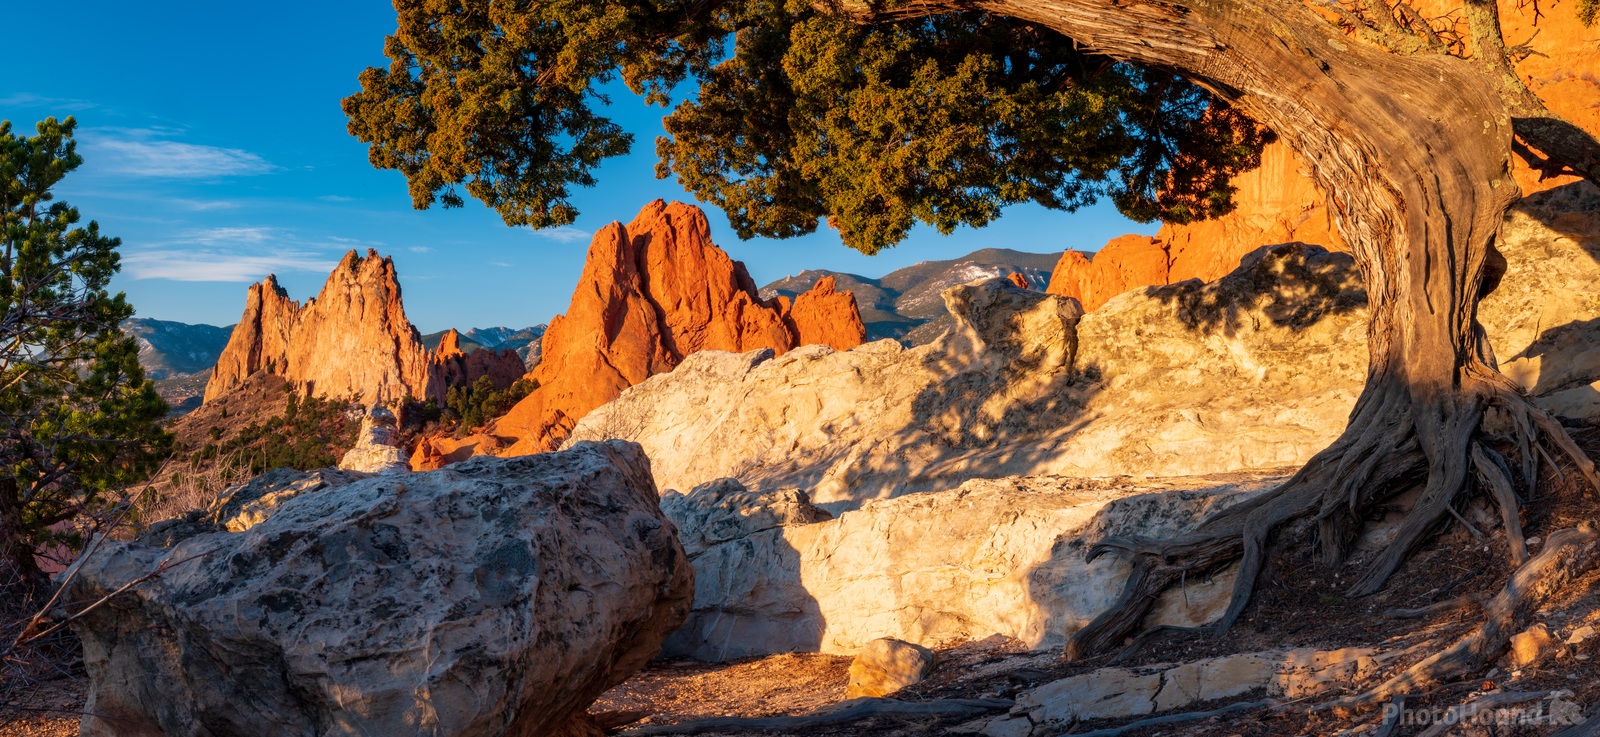 Image of Garden of the Gods by Chris Scalise